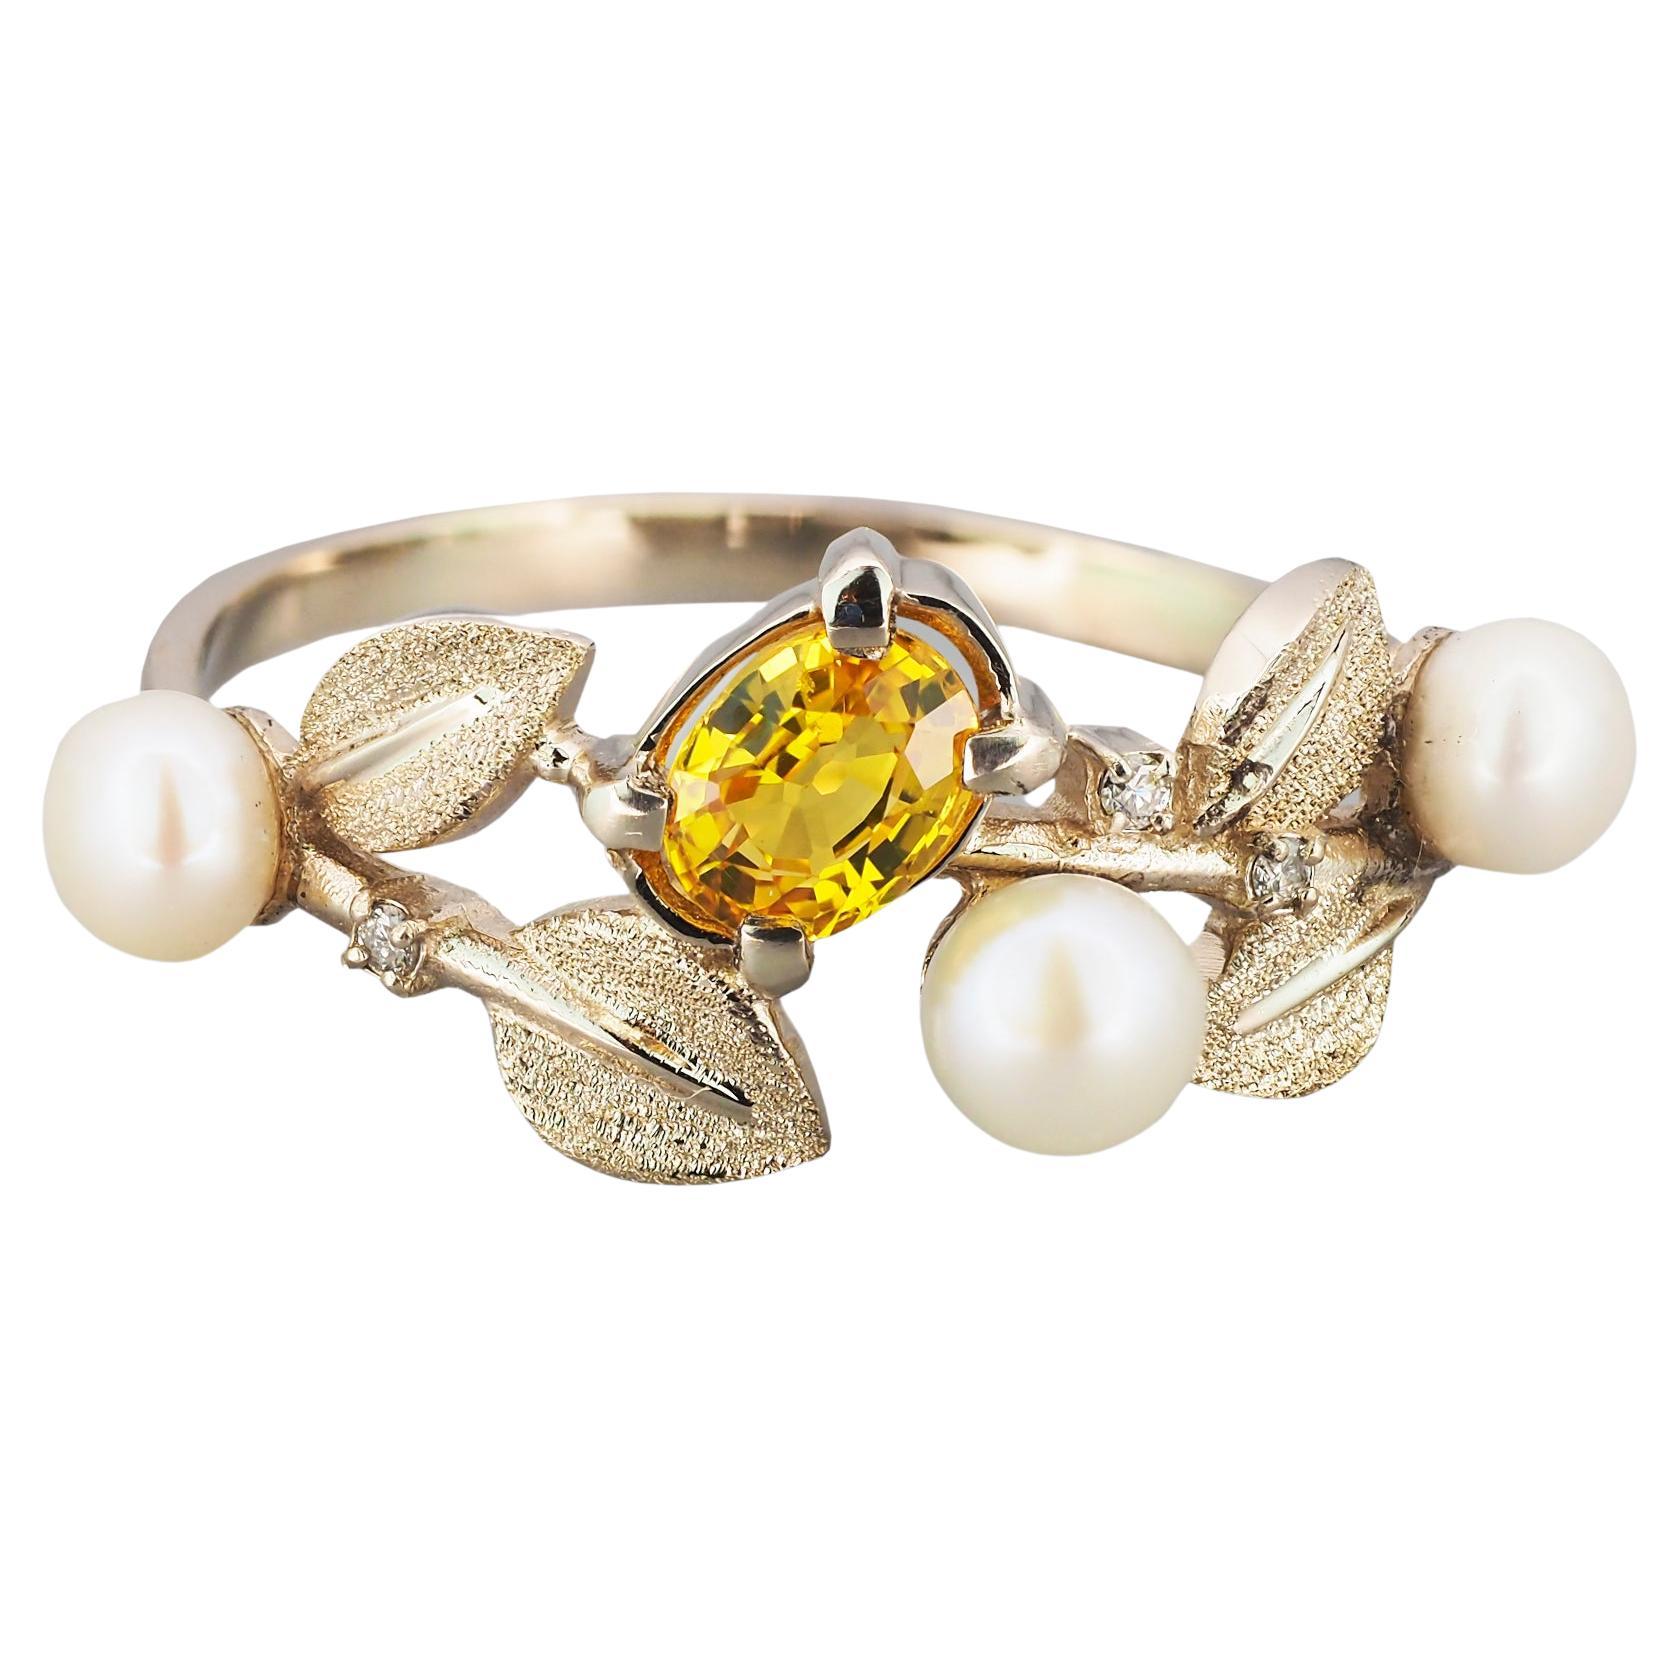 For Sale:  14k Gold Floral Ring with Sapphire, Diamonds and Pearls